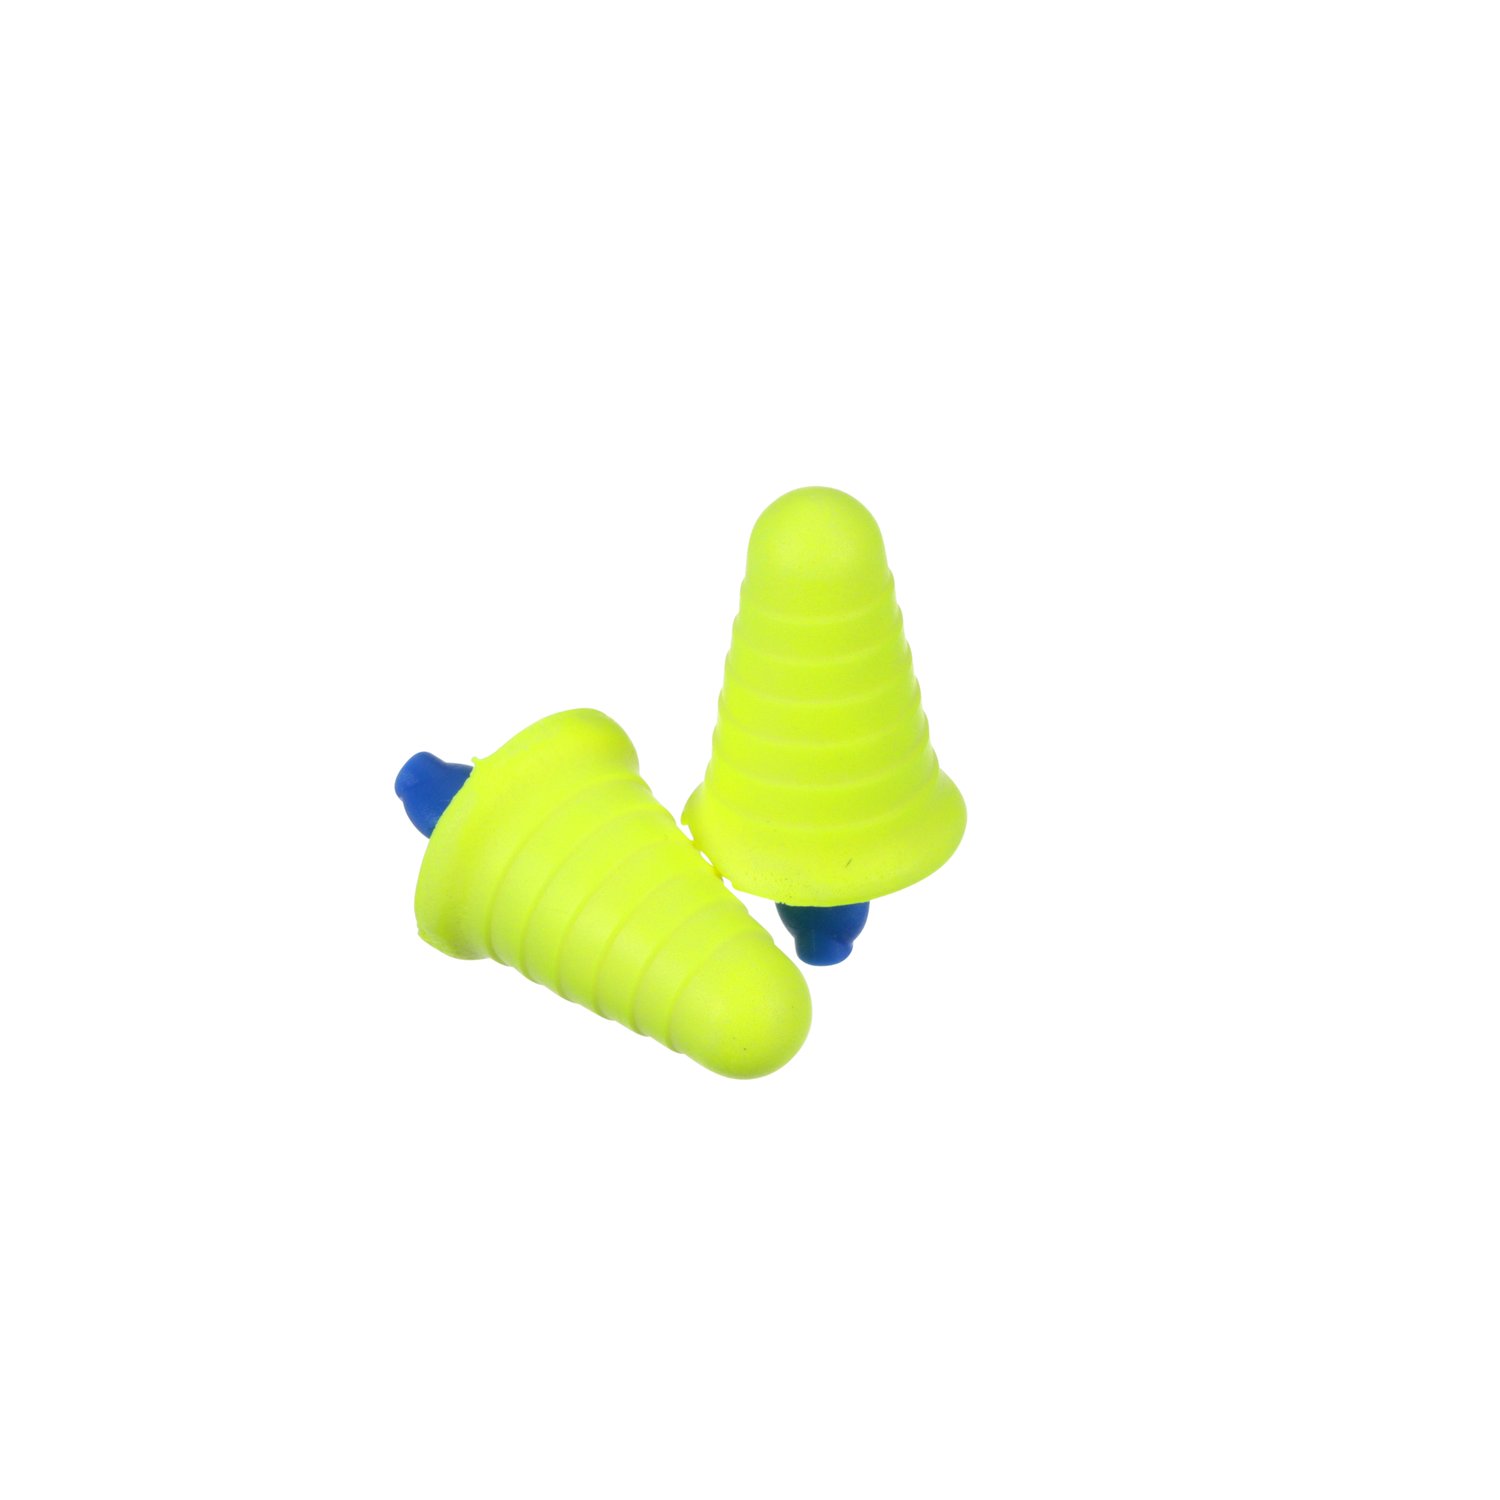 7000127183 - 3M E-A-R Push-Ins Earplugs 318-1008, with Grip Rings, Uncorded, Poly
Bag, 2000 Pair/Case